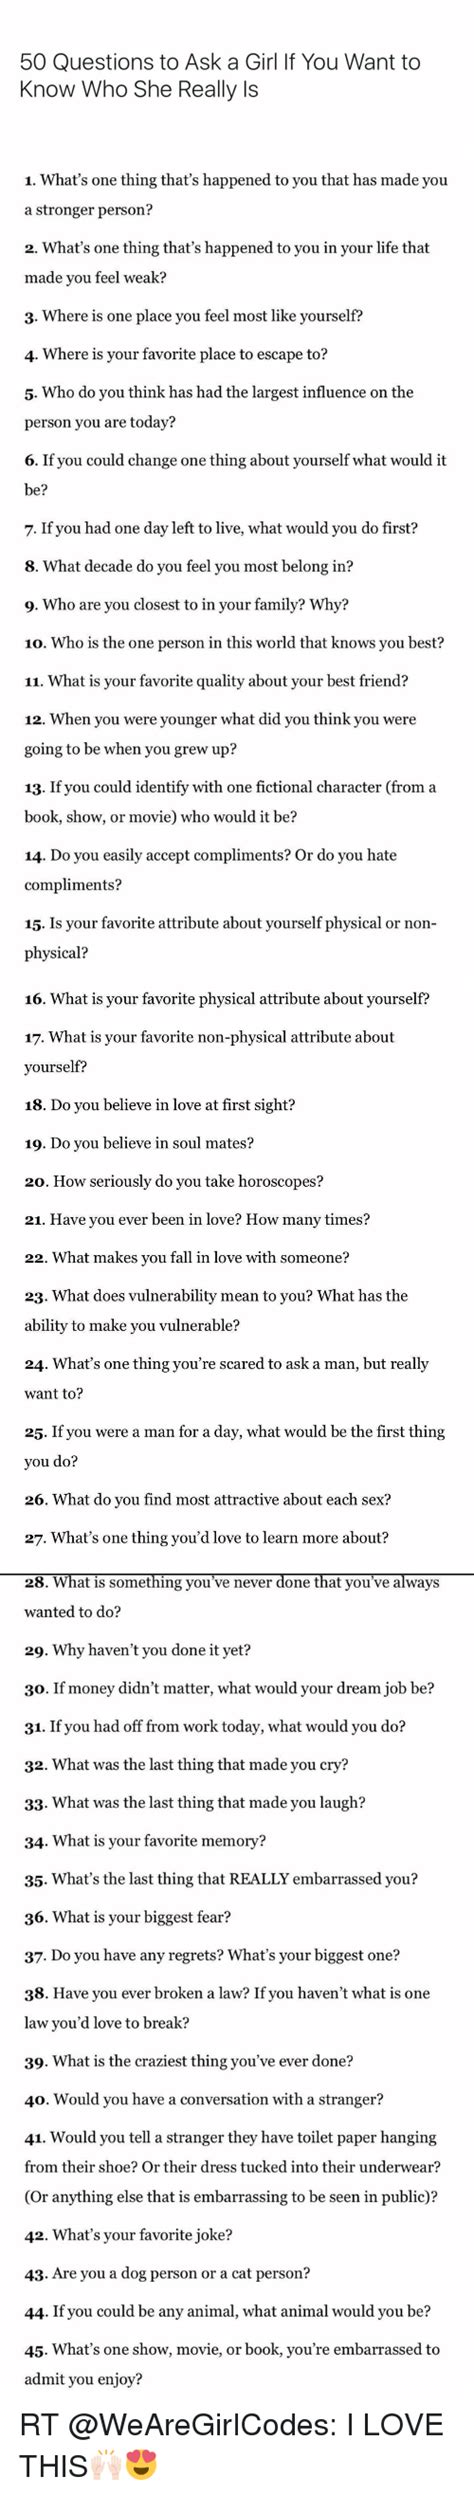 50 Questions To Ask A Girl If You Want To Know Who She